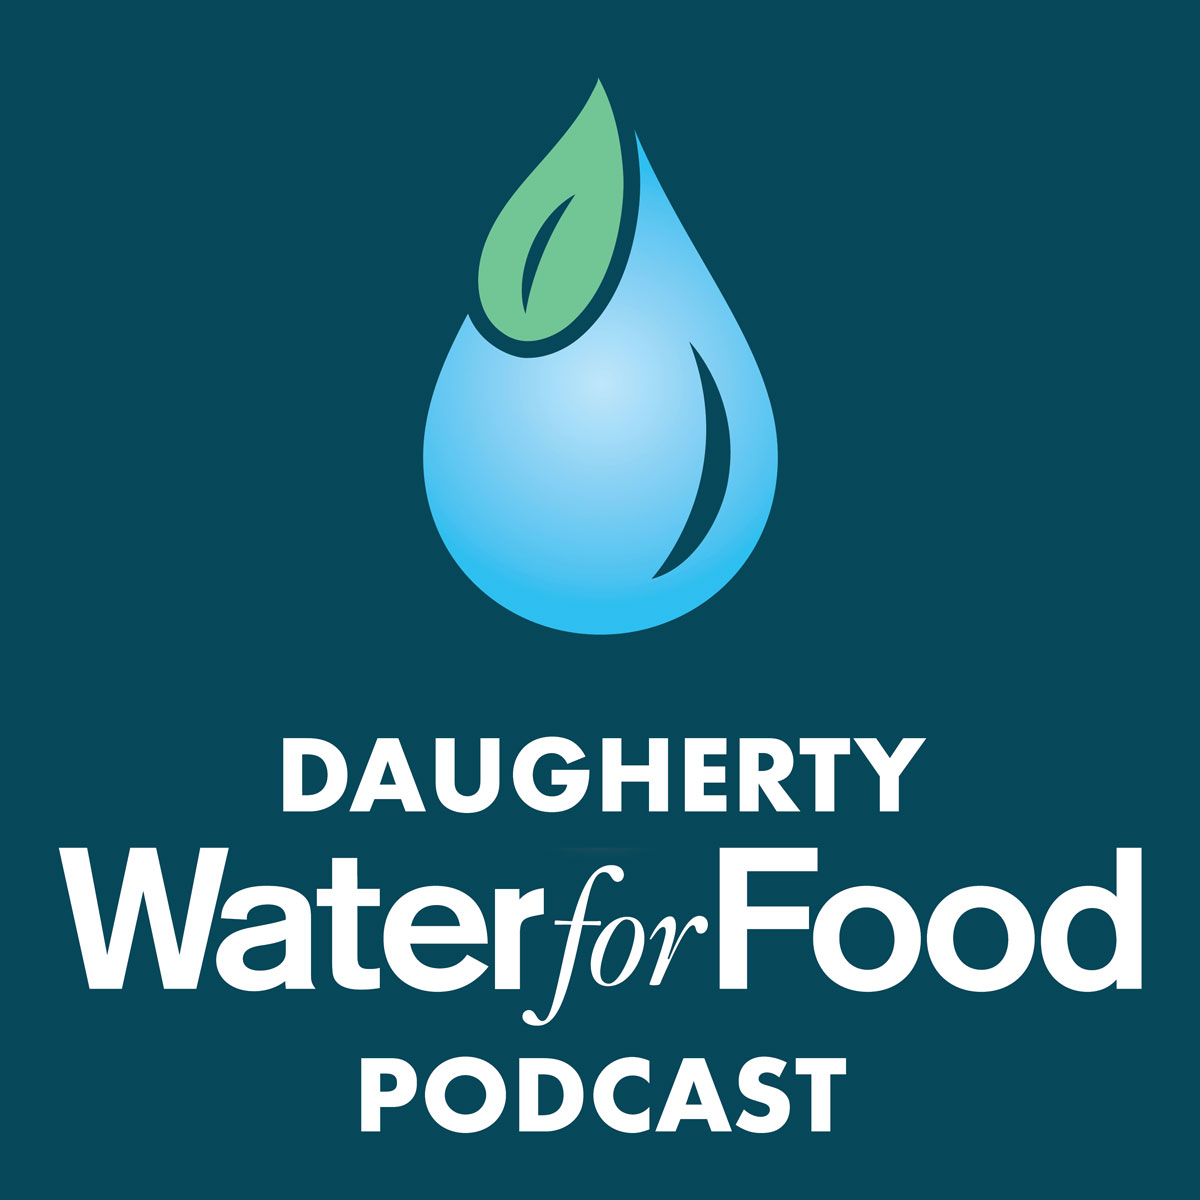 Daugherty Water for Food Podcast Launches on Apple, Spotify, Stitcher and Google - AgNewsWire